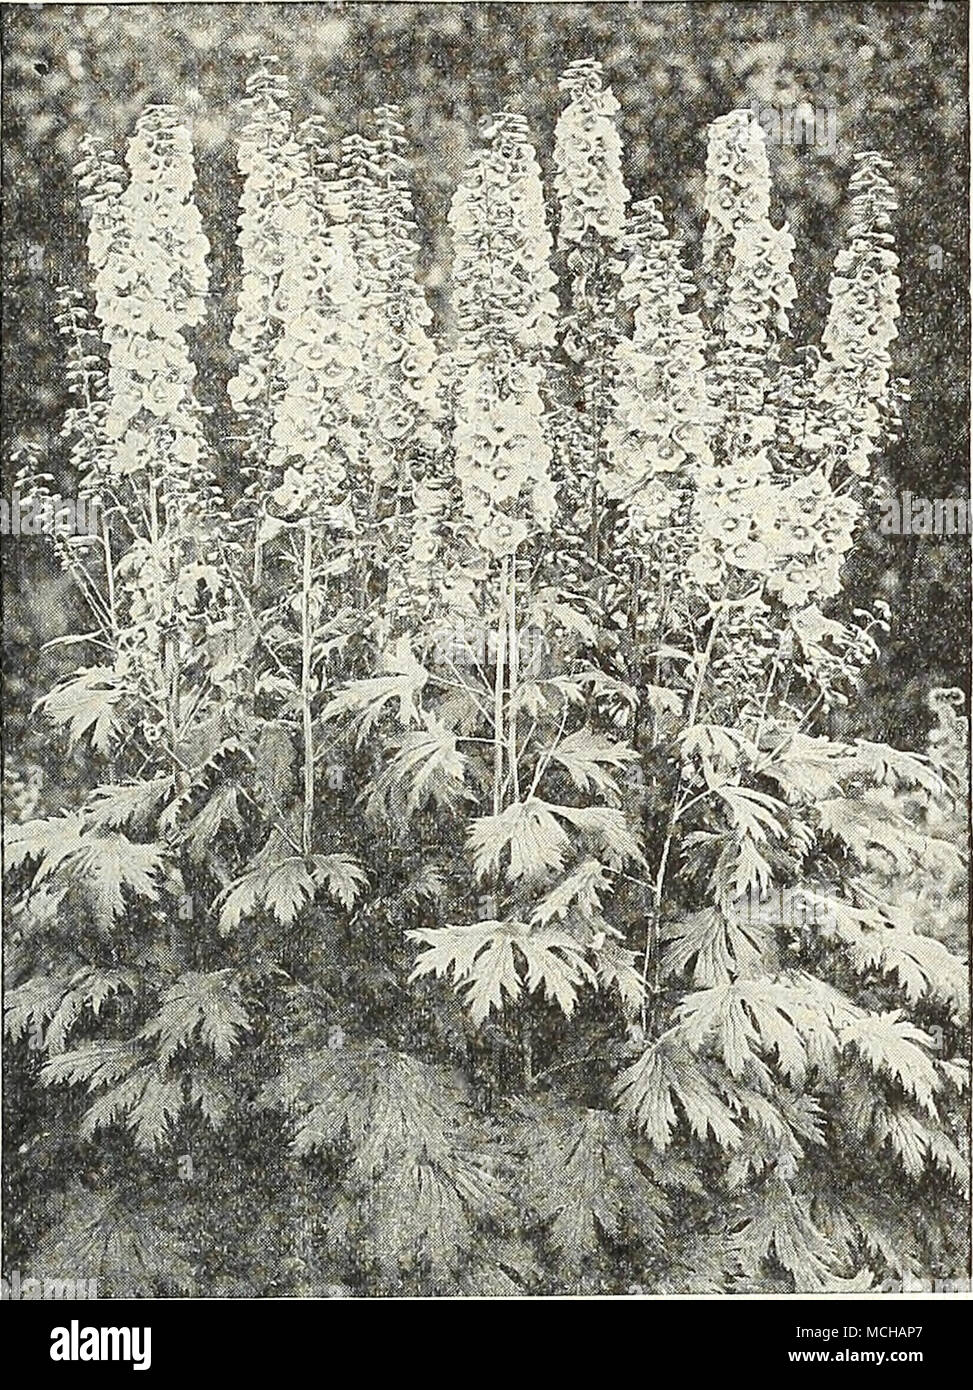 . Dreer's De Luxe Delphiniums Dreer's De Luxe Hybrids. Produced from the world's choicest named varieties, secured without regard to cost from the most noted European and American specialists. The results obtained were really marvelous; the plants of strong, vigorous habit with large spikes of enormous flowers in every shade of blue from the palest lavender to the richest oxford-blue . as well as a number of pastel or art shades. Fully one-third were double- flowering and mostly with white centre or eye, but with a fair percentage having the dark or bee centre. A really wonderful strain that i Stock Photo